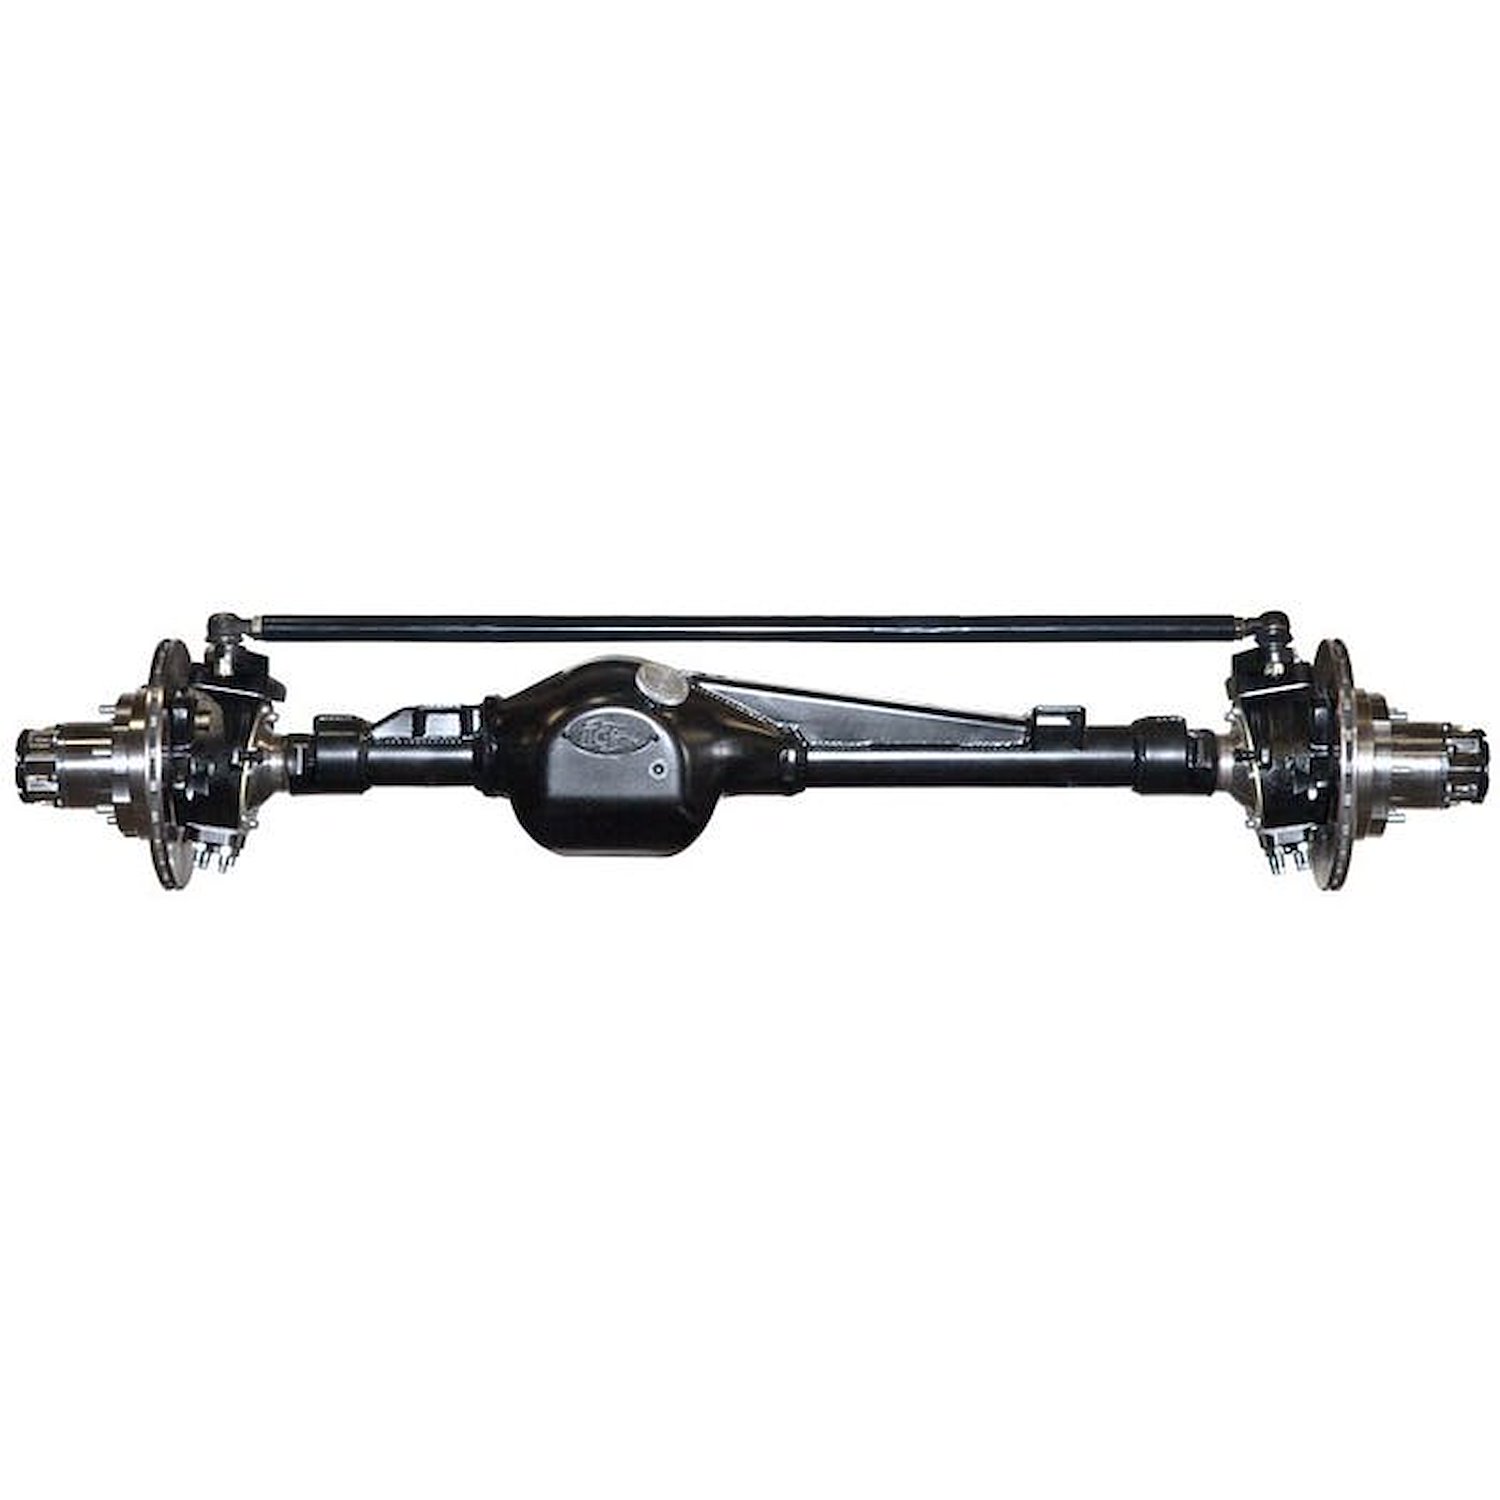 301647-1-KIT Rock Assault Fully-Built Front Axles, +5 Width, LHD, V6, 4.88, Grizzly, Locking Hubs, Toyota